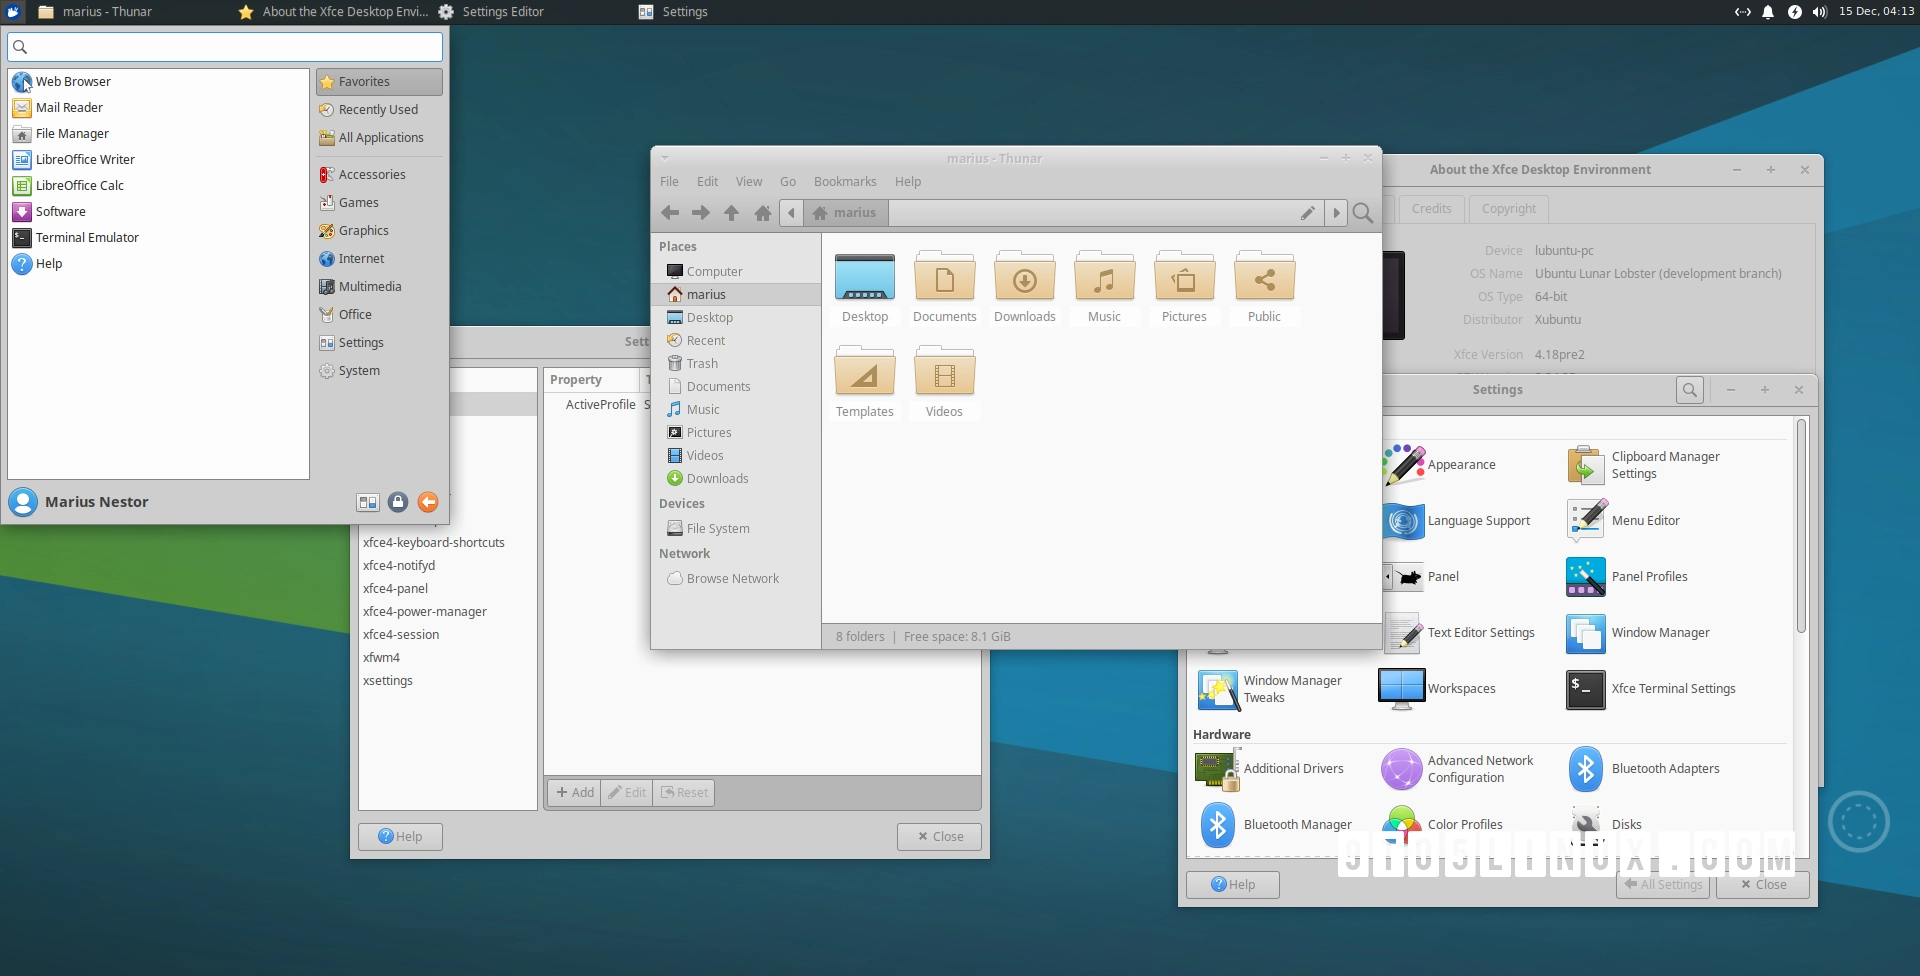 Xfce 4.18 Desktop Environment Officially Released, This Is What’s New